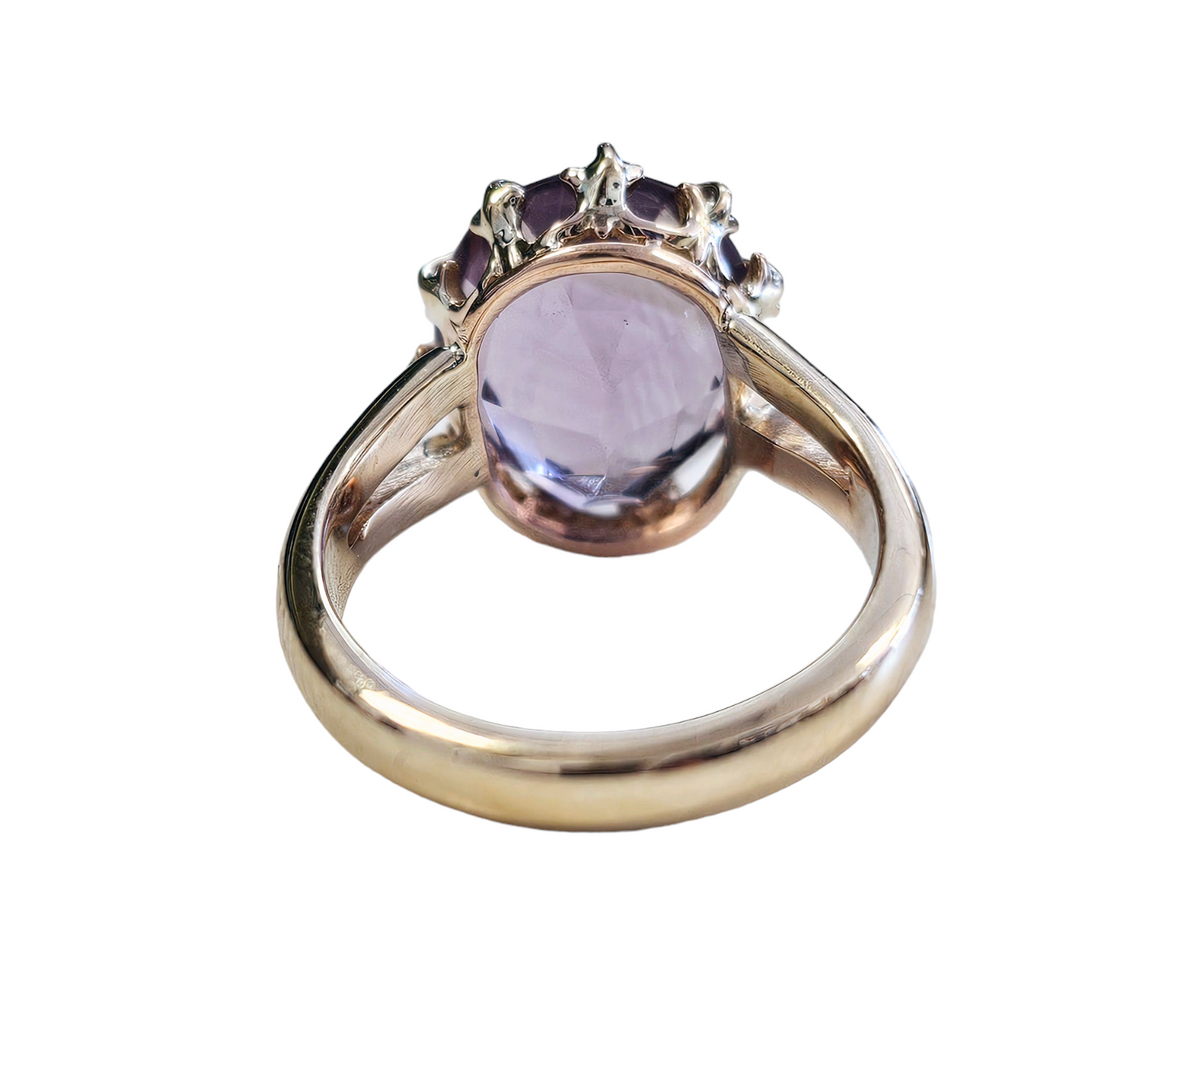 Circa 1960's Vintage Oval Amethyst Ring with Split Shank made in 14-Karat Yellow Gold